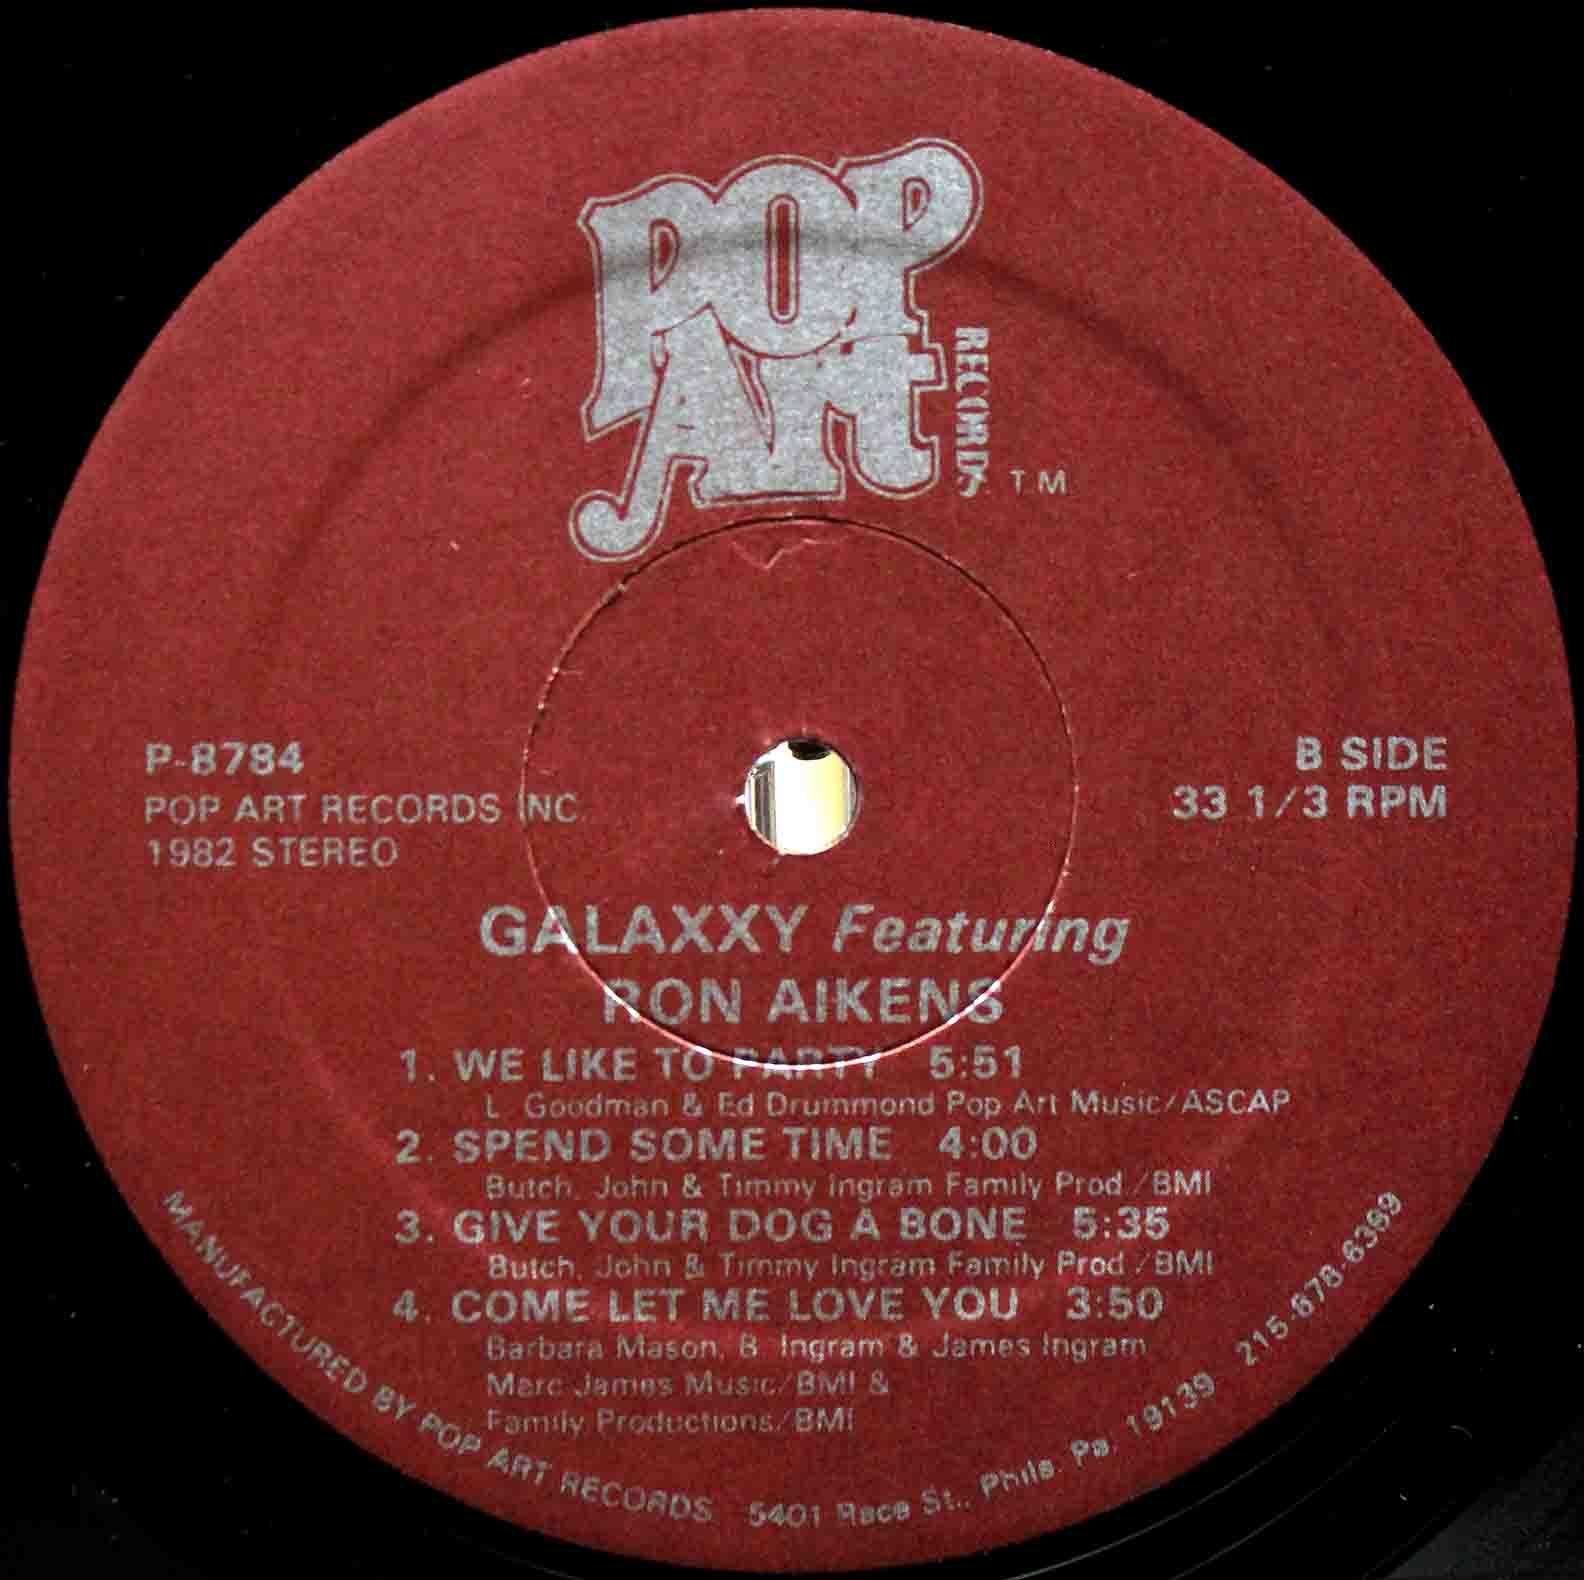 Galaxxy Featuring Ron Aikens (1980) – Galaxxy 04